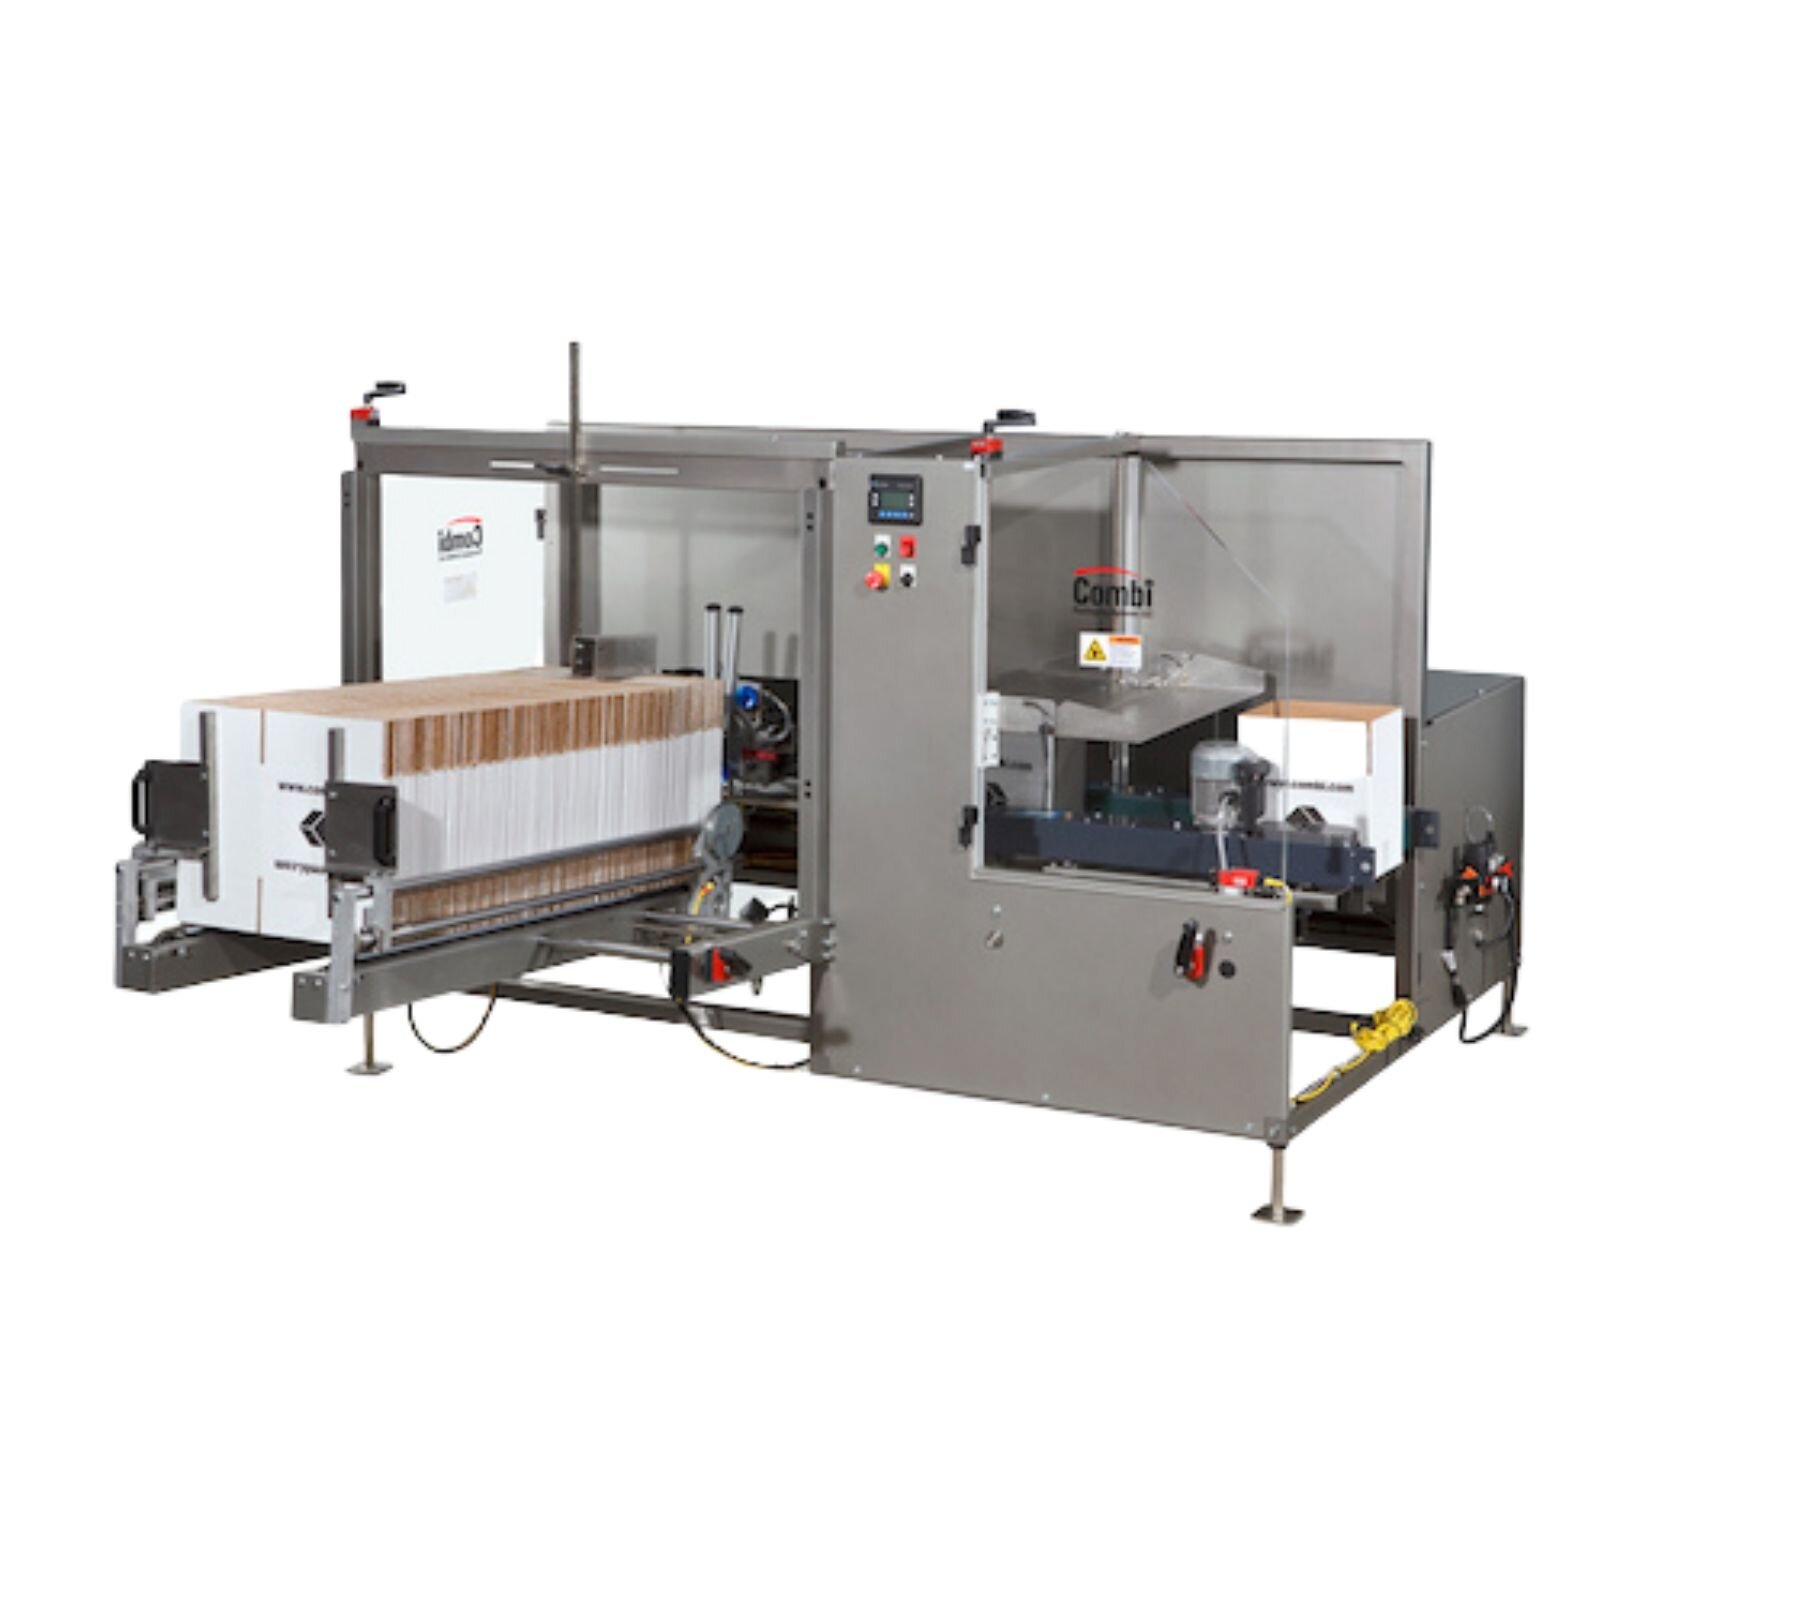 Case Erectors - By efficiently and consistently erecting boxes, automatic packing equipment can provide increased production and labor savings. A Combi case erecting machine gives you flexibility with easy changeovers and a range of speed capabilities.